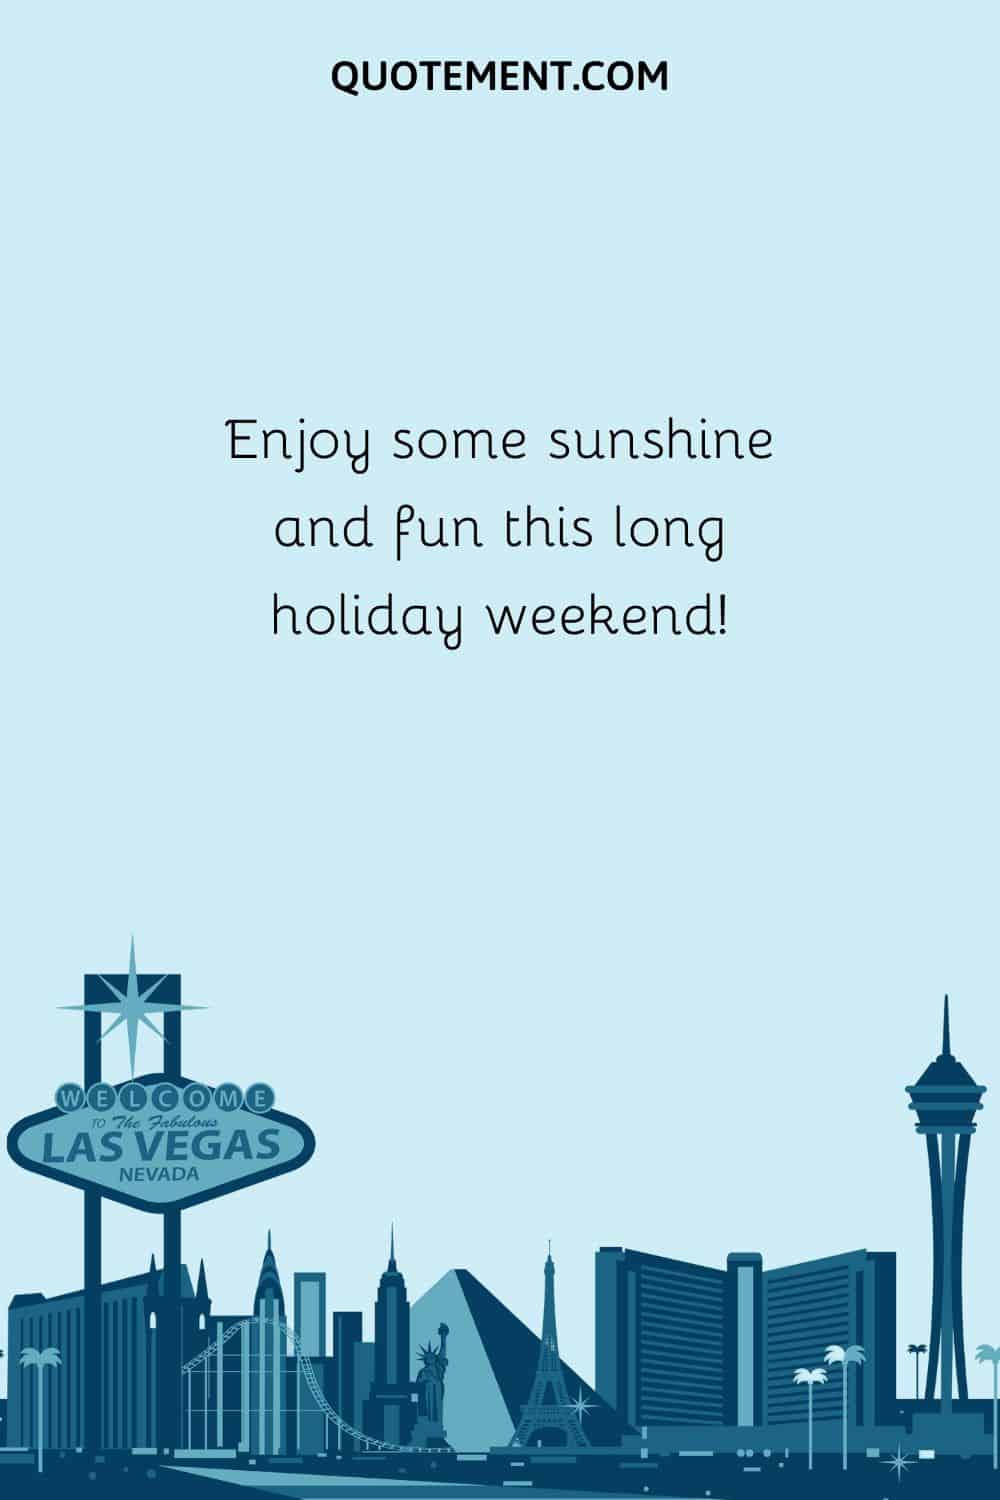 Enjoy some sunshine and fun this long holiday weekend!